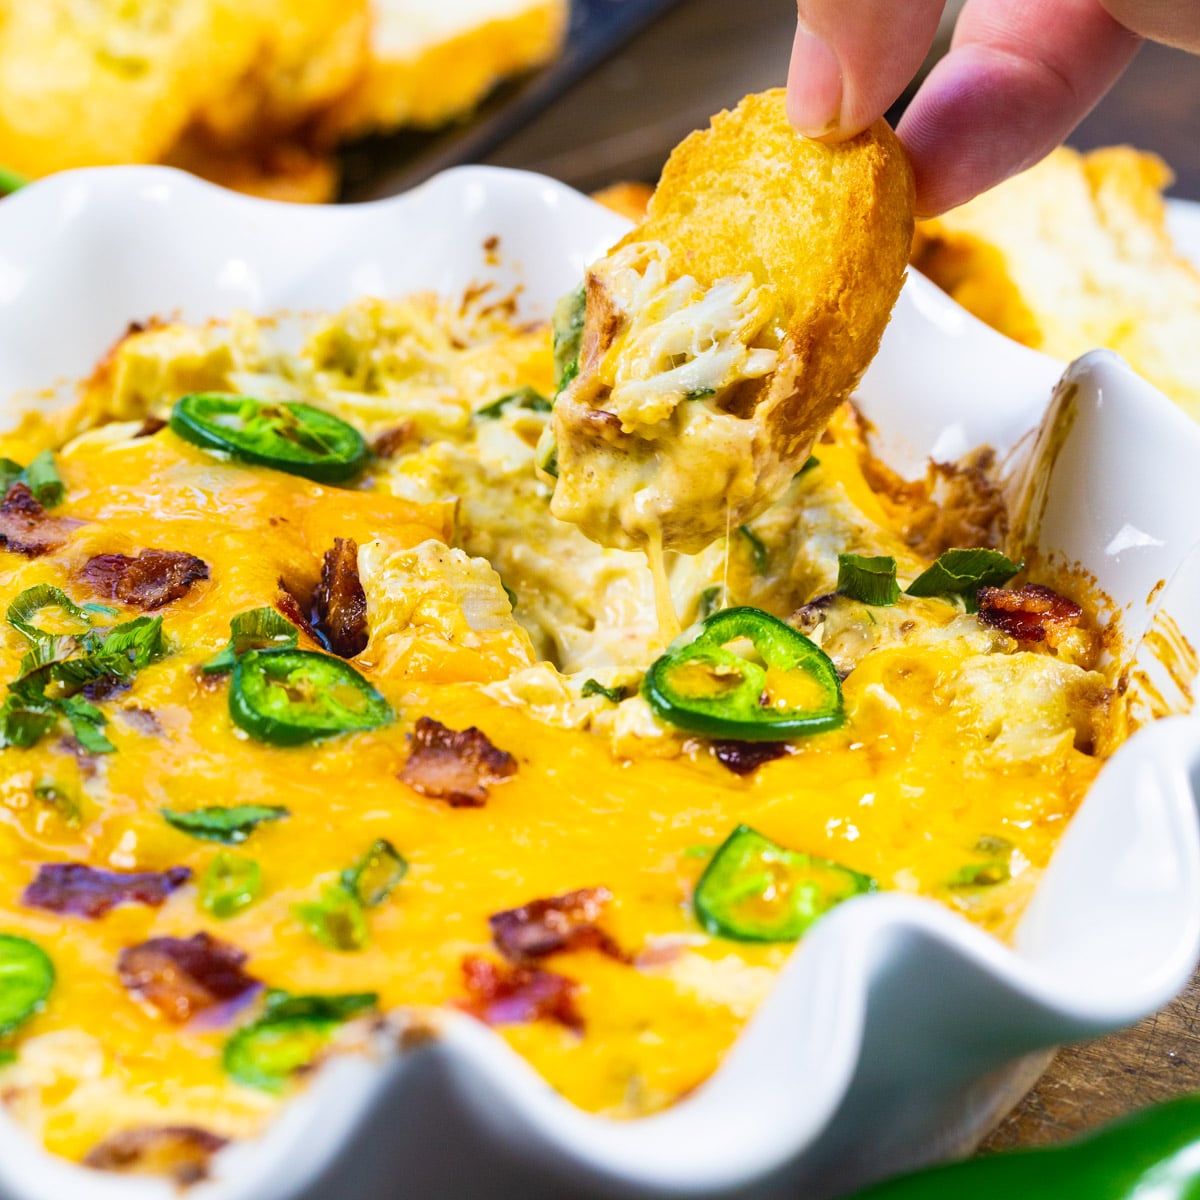 Jalapeno Popper Crab Dip getting scooped up with piece of toasted baguette.